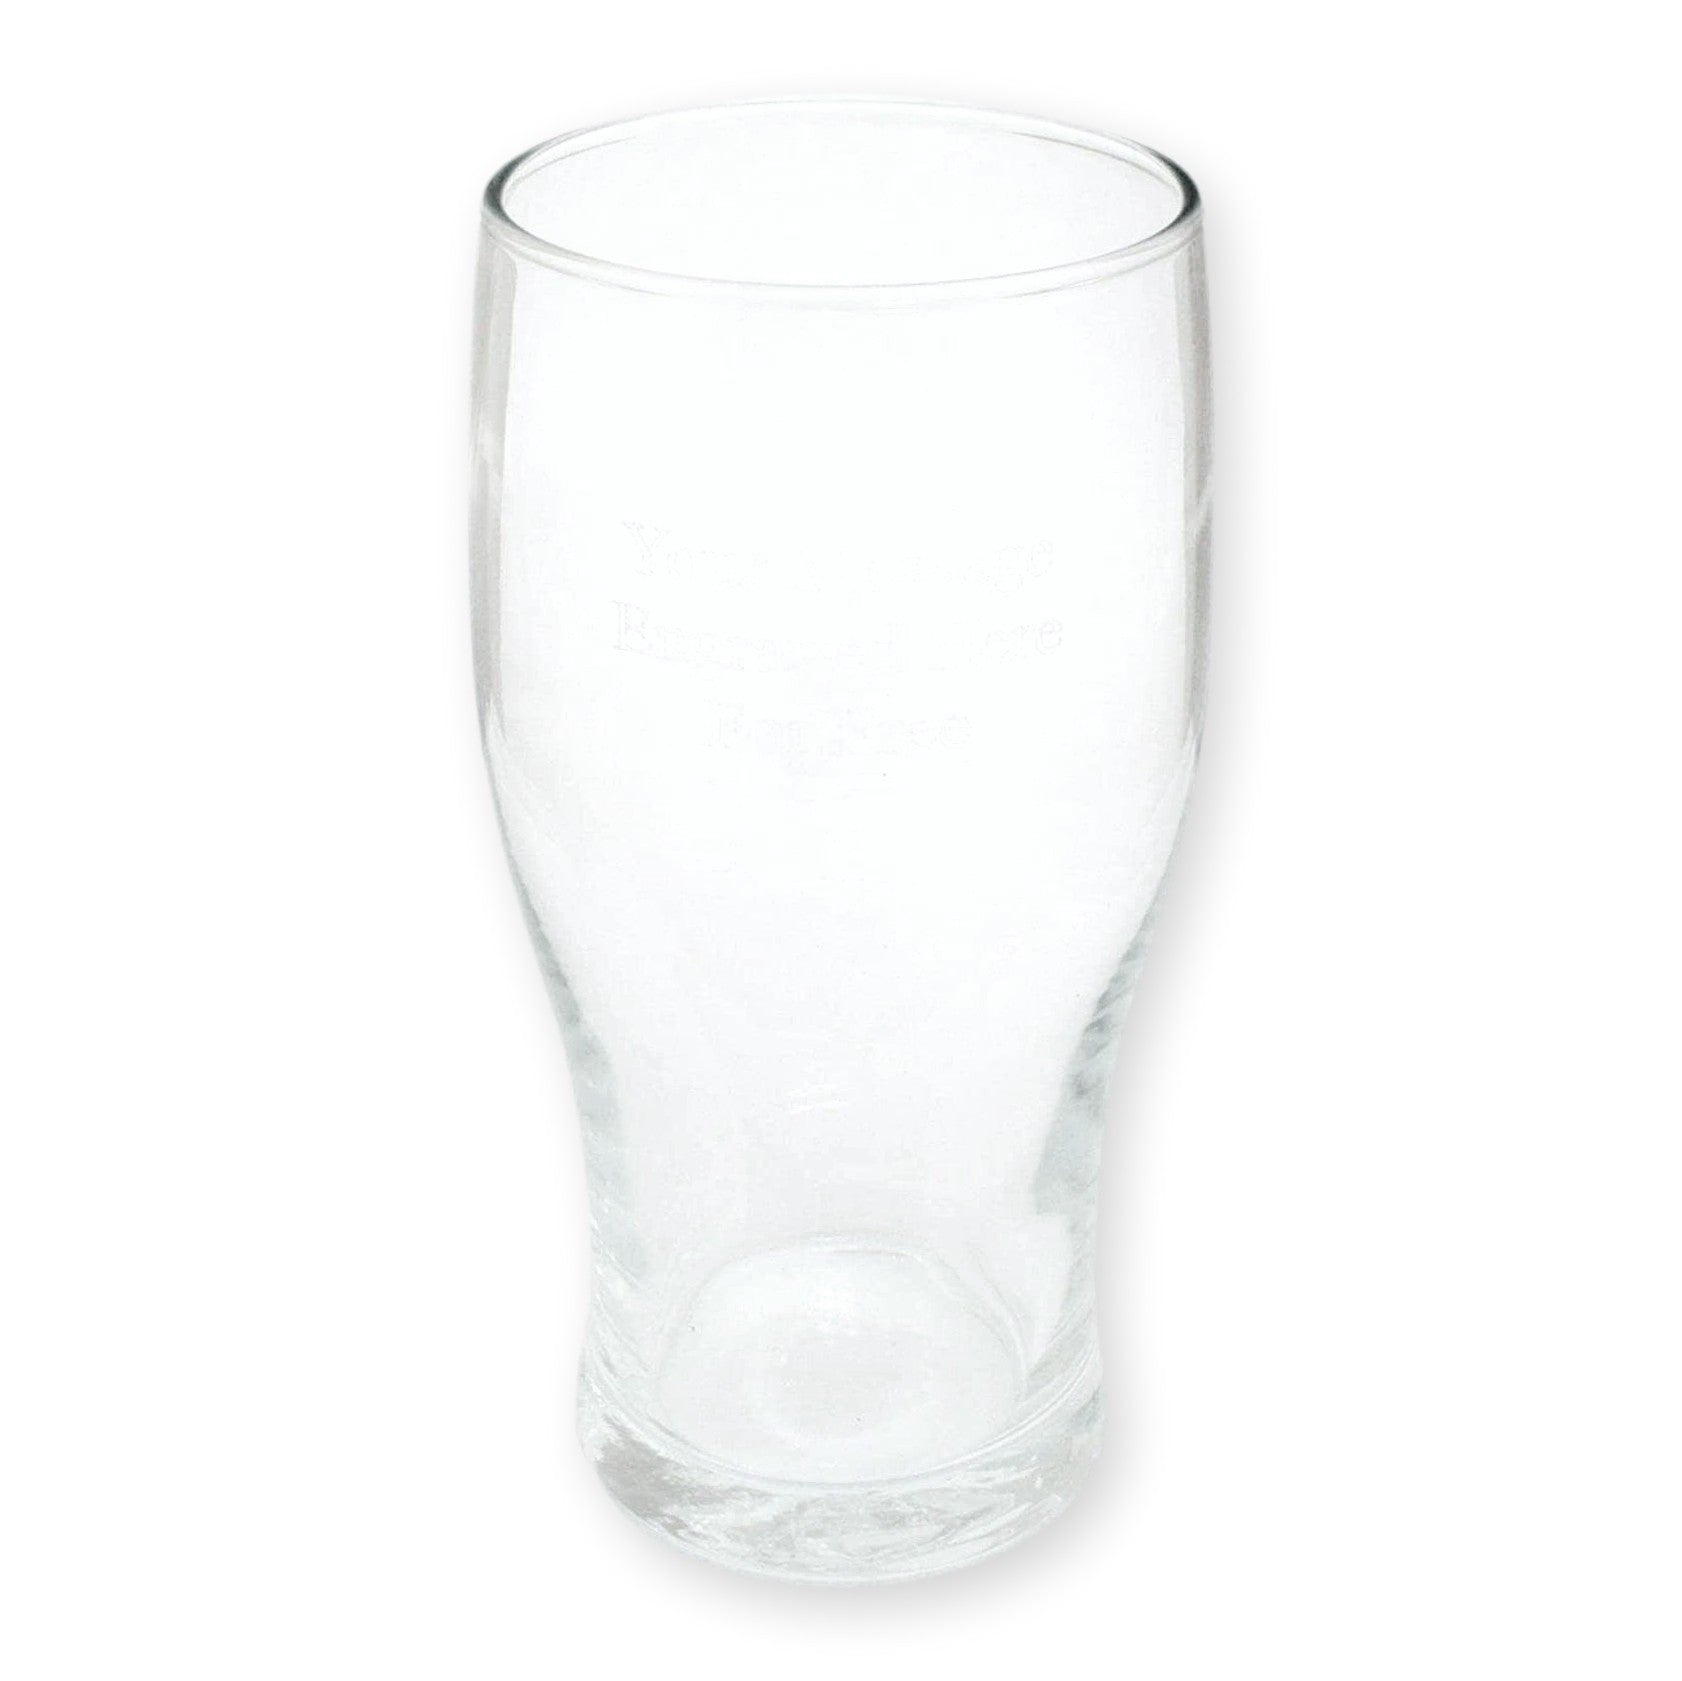 Larger Glass